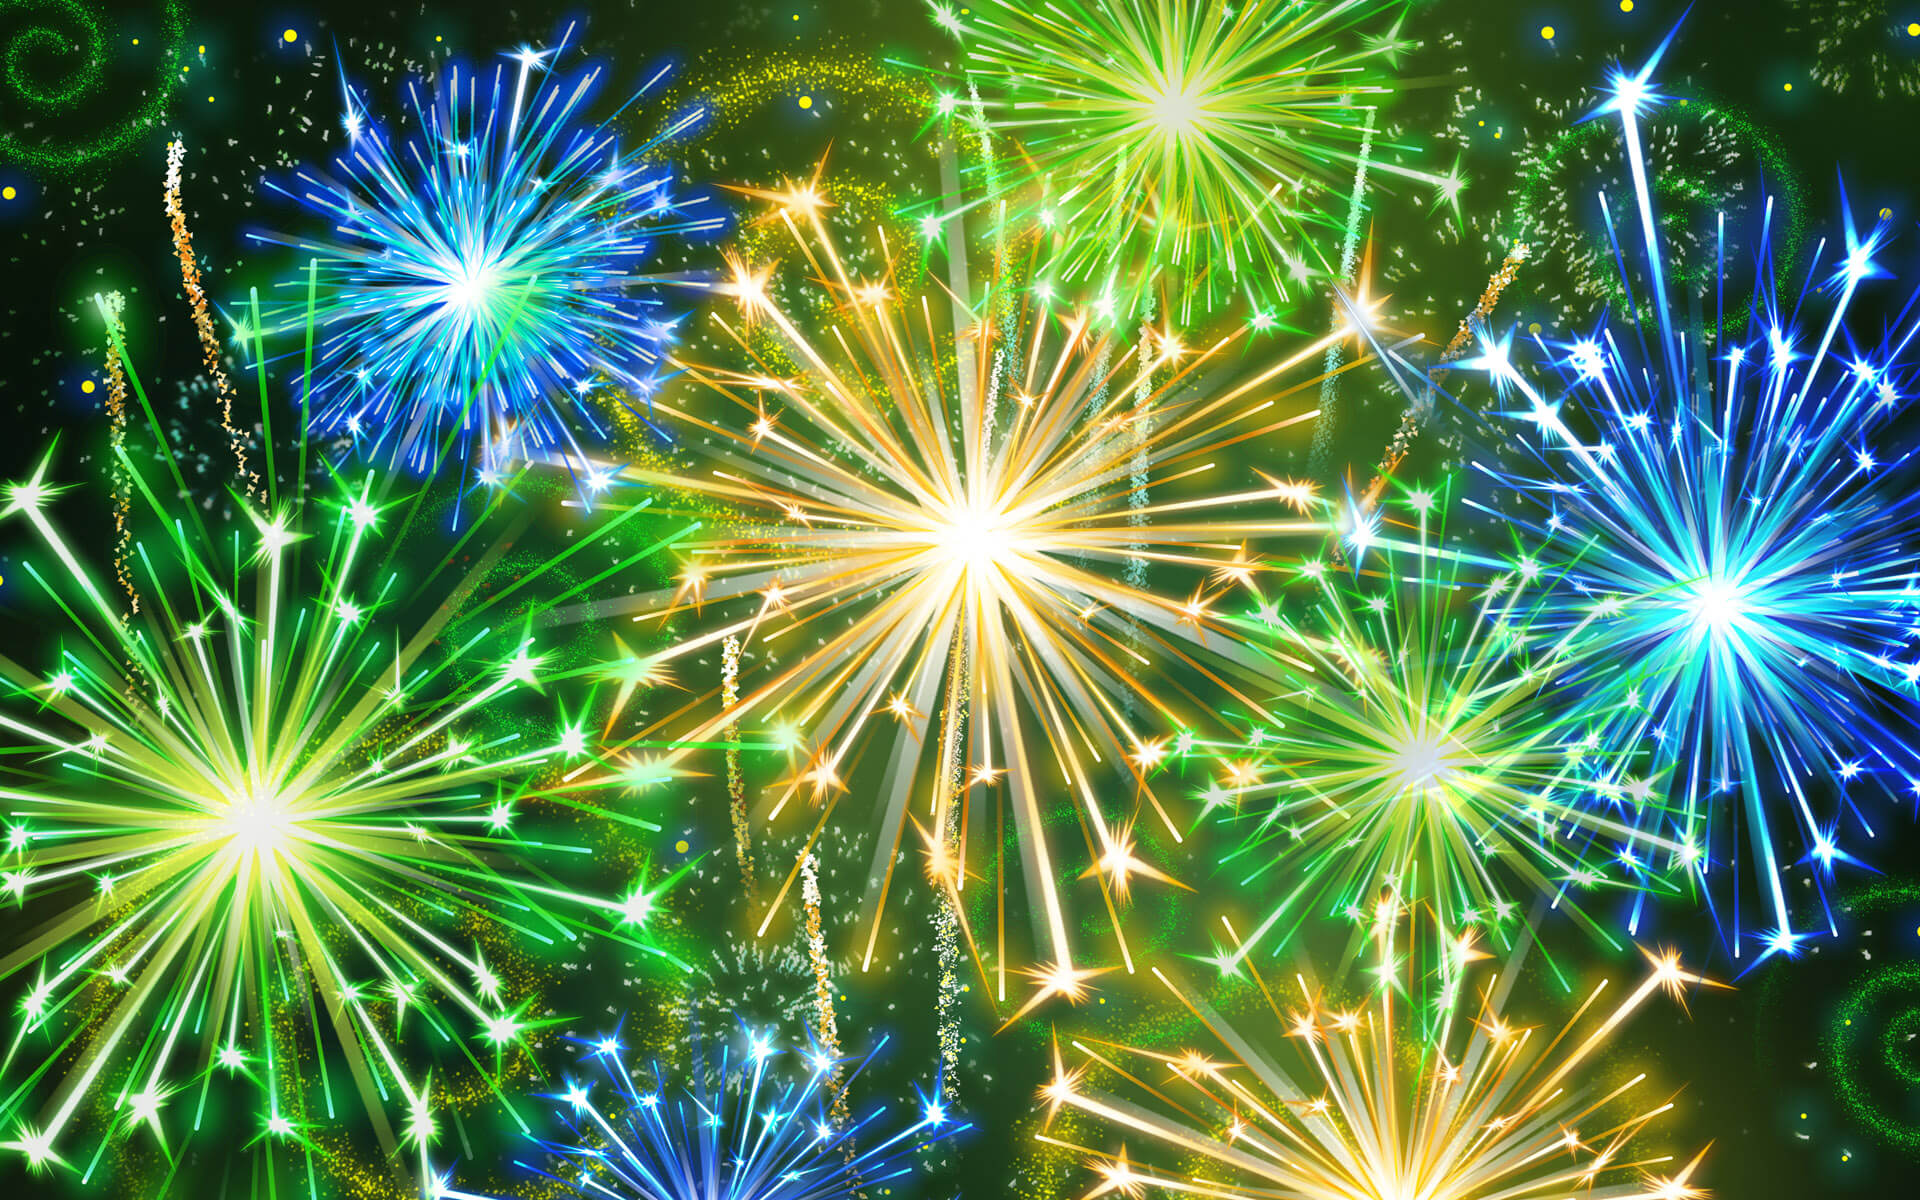 A Few Tips While You Are Buying Fireworks - Intergalactic Fireworks